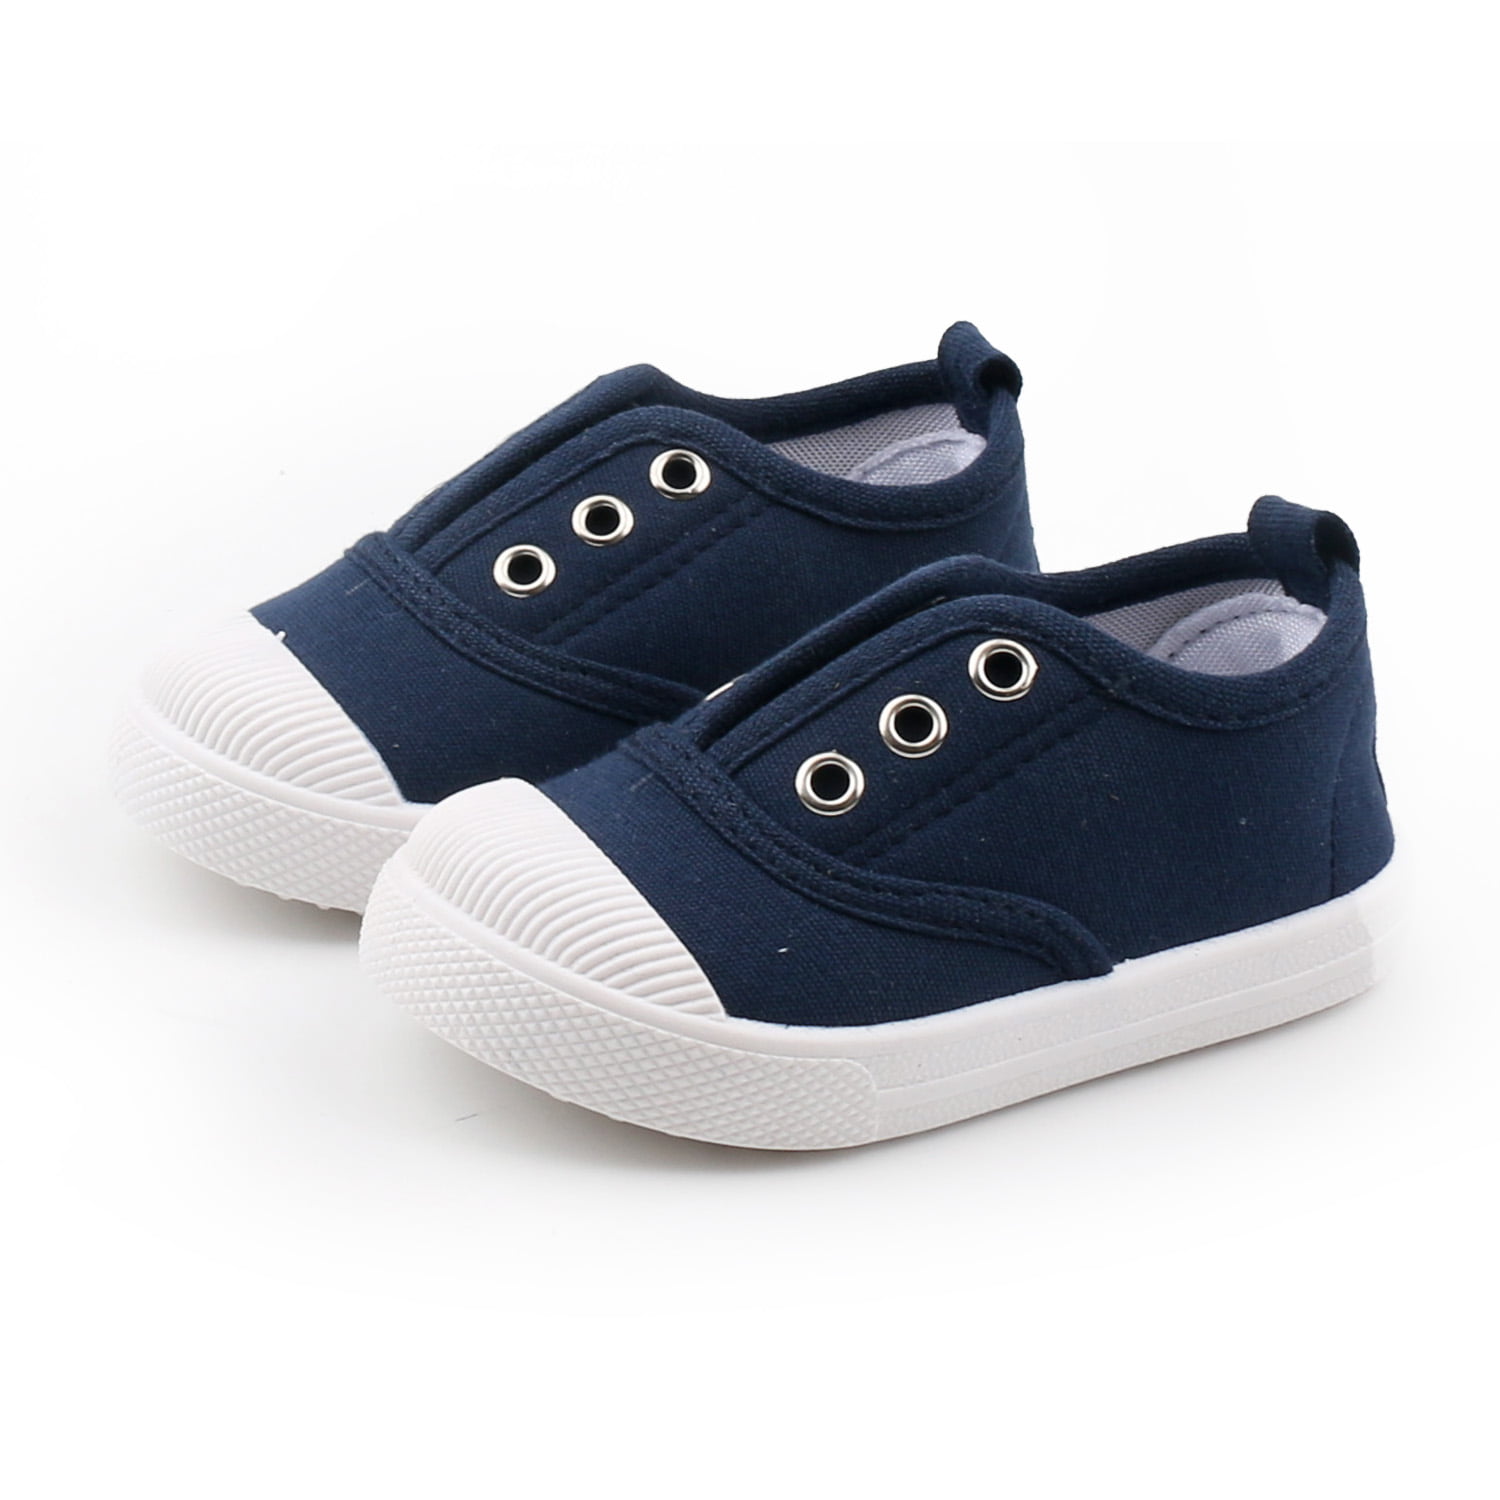 SportHome Baby Girls Boys Shoes Sneaker Anti-Slip Soft Sole Toddler Colorful Canvas Shoes 